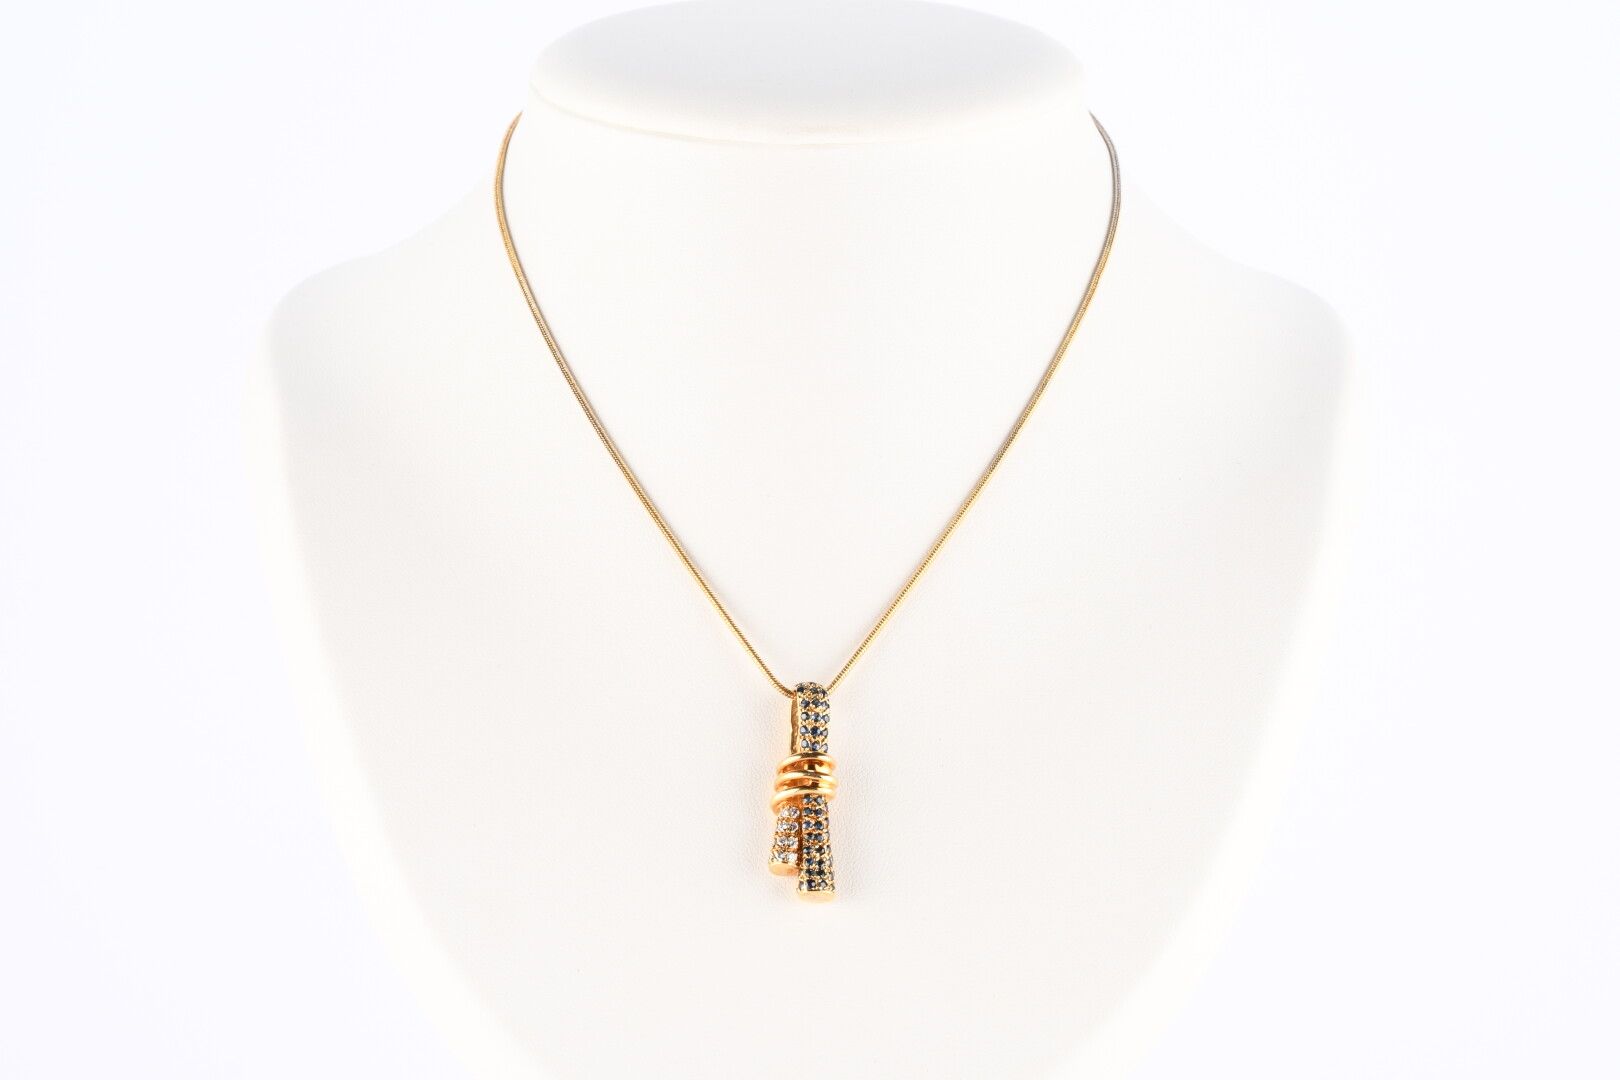 Yellow gold 750 pendant and chain with a knotted design … | Drouot.com